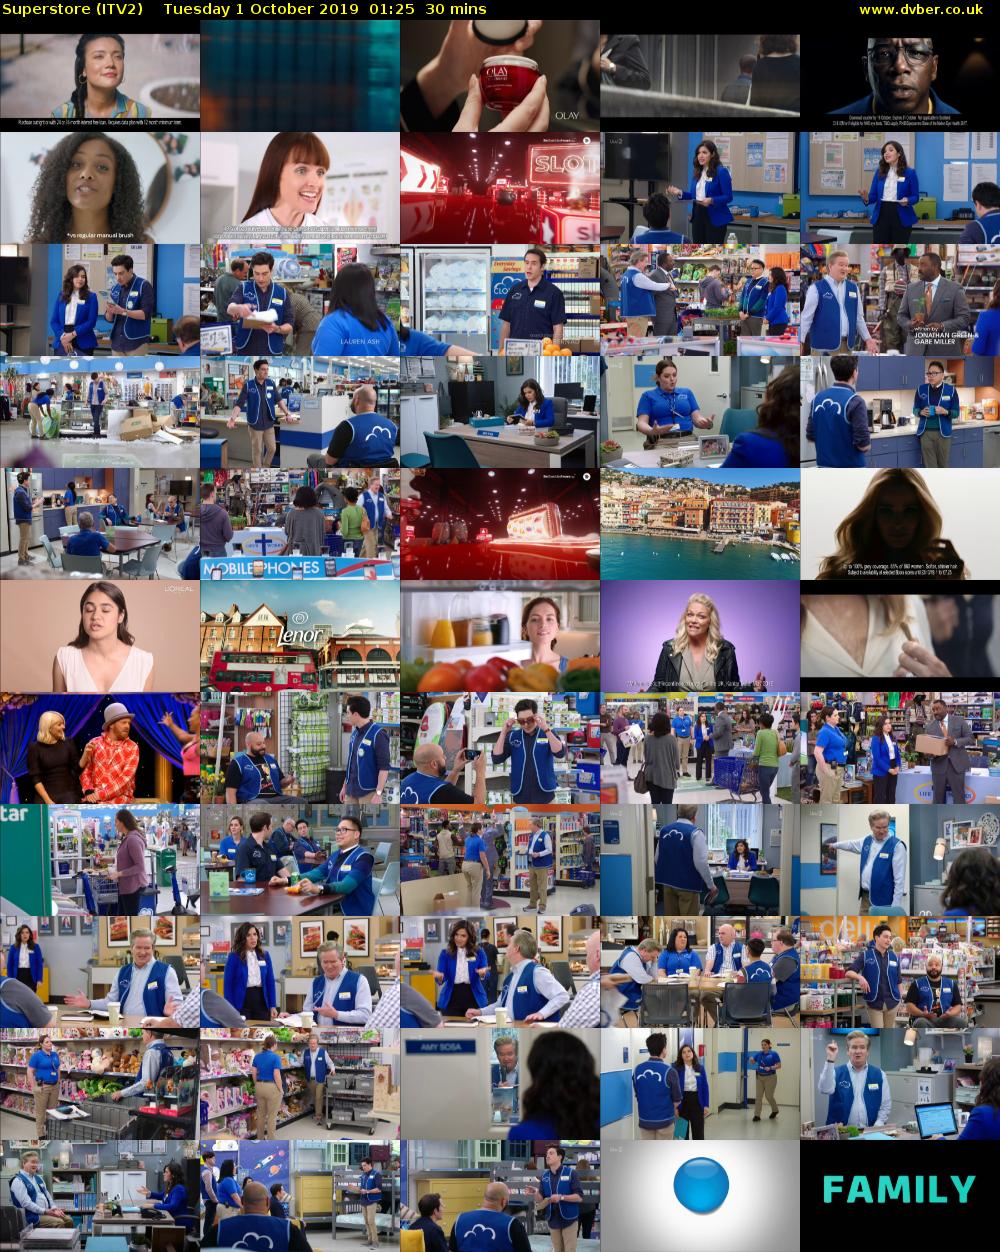 Superstore (ITV2) Tuesday 1 October 2019 01:25 - 01:55